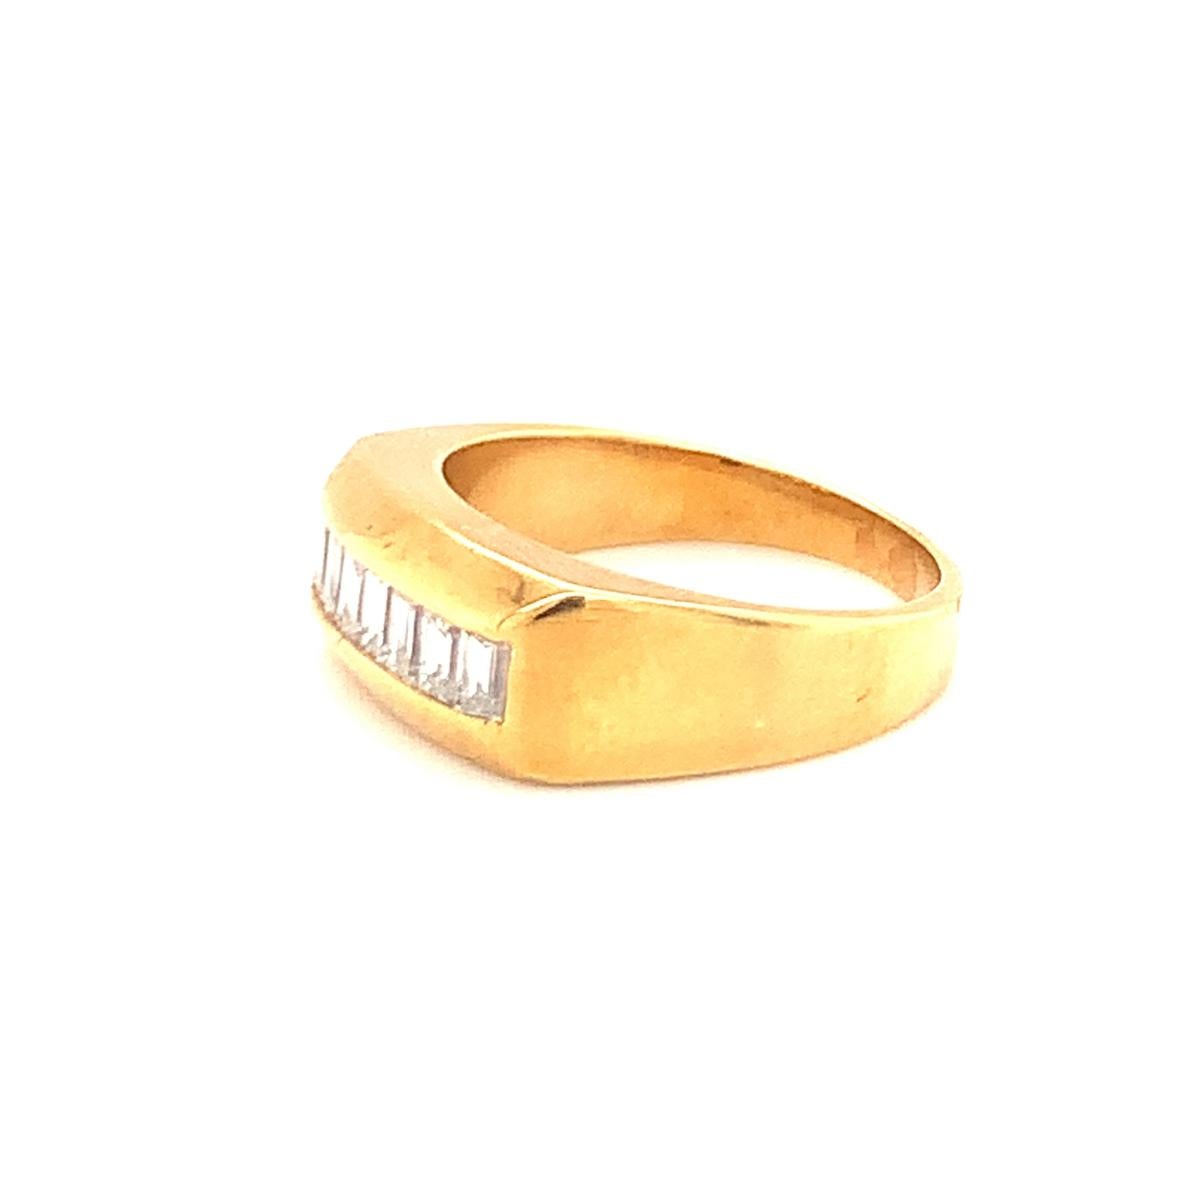 Baguette Cut Diamond Band in 18k Yellow Gold, circa 1970s For Sale